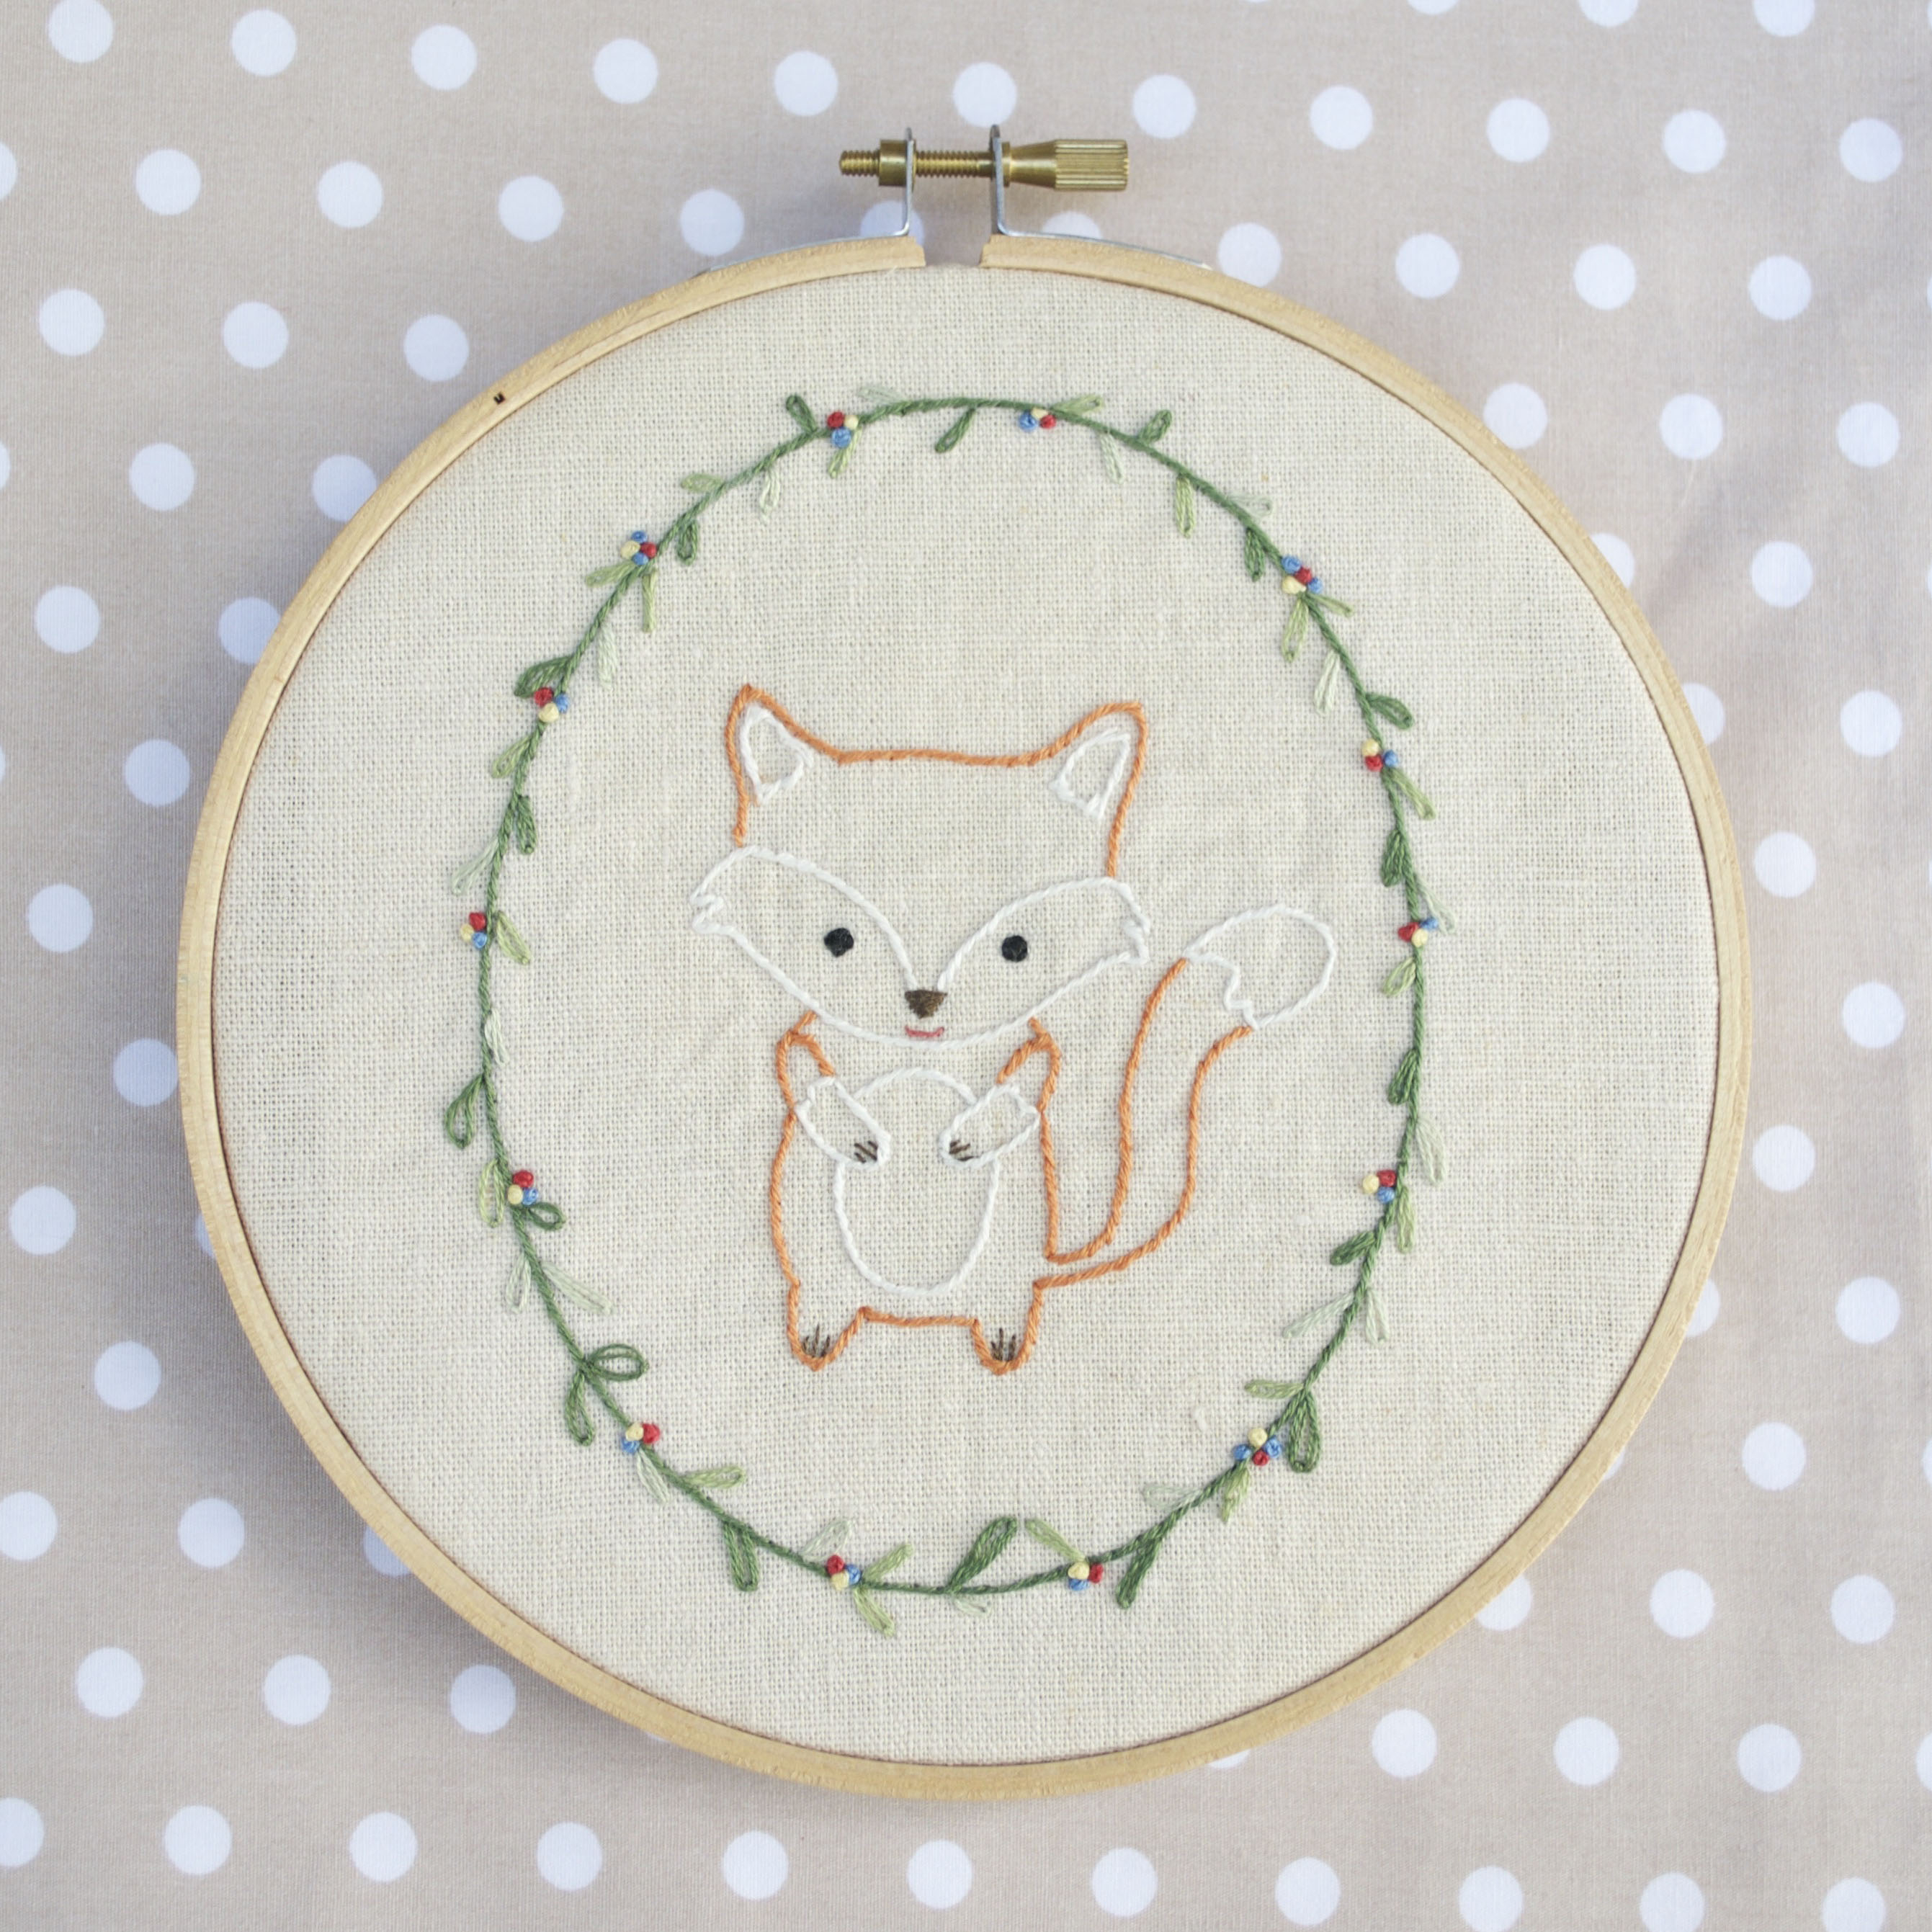 How To Make Hand Embroidery Patterns Little Fox Hand Embroidery Pdf Pattern Instructions